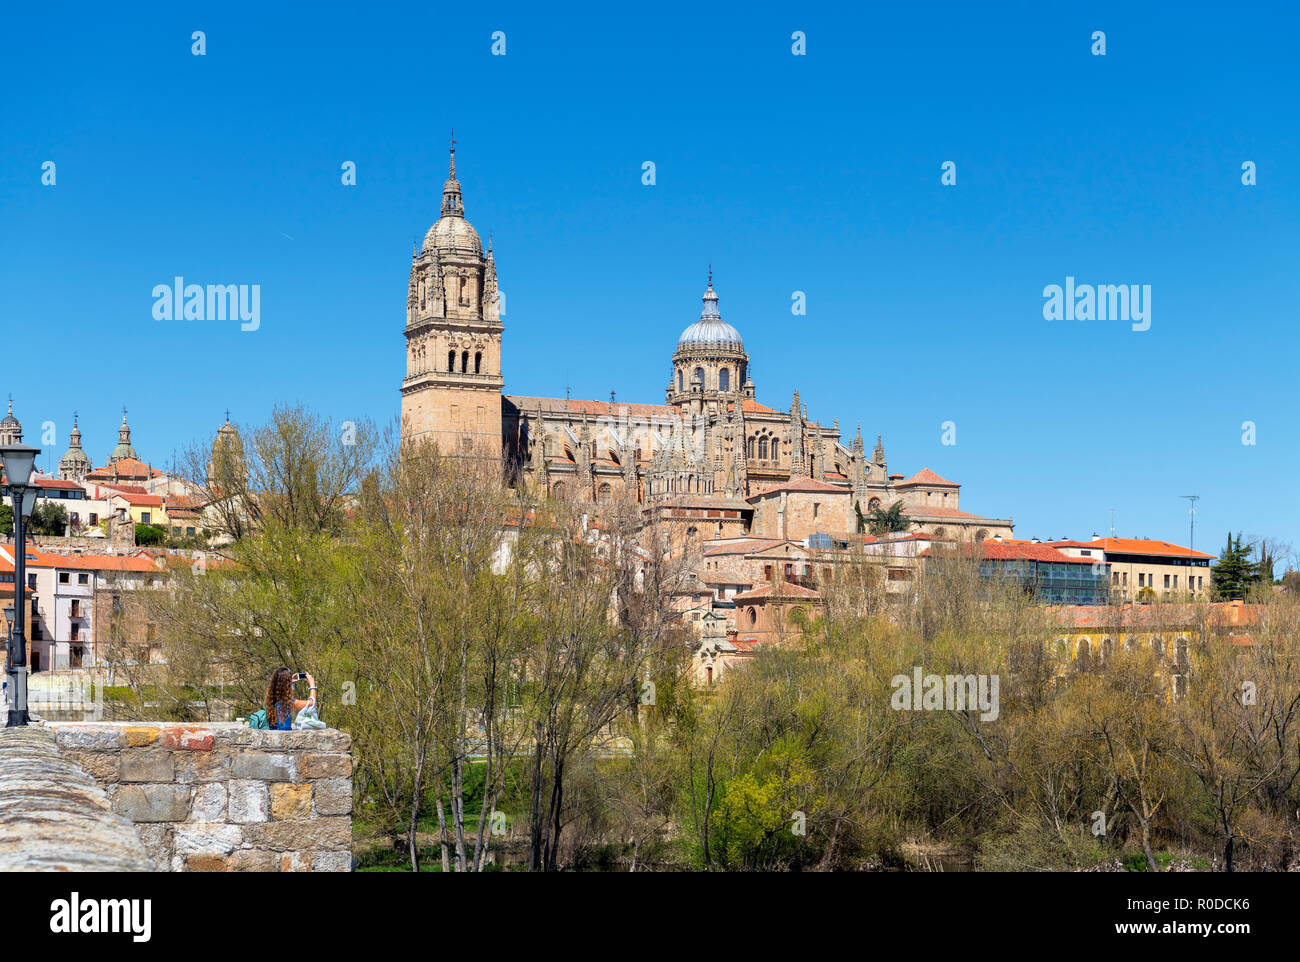 Tourist taking a picture of the old town and cathedrals from the Puente Romano (Roman Bridge), Salamanca, Castilla y Leon, Spain Stock Photo